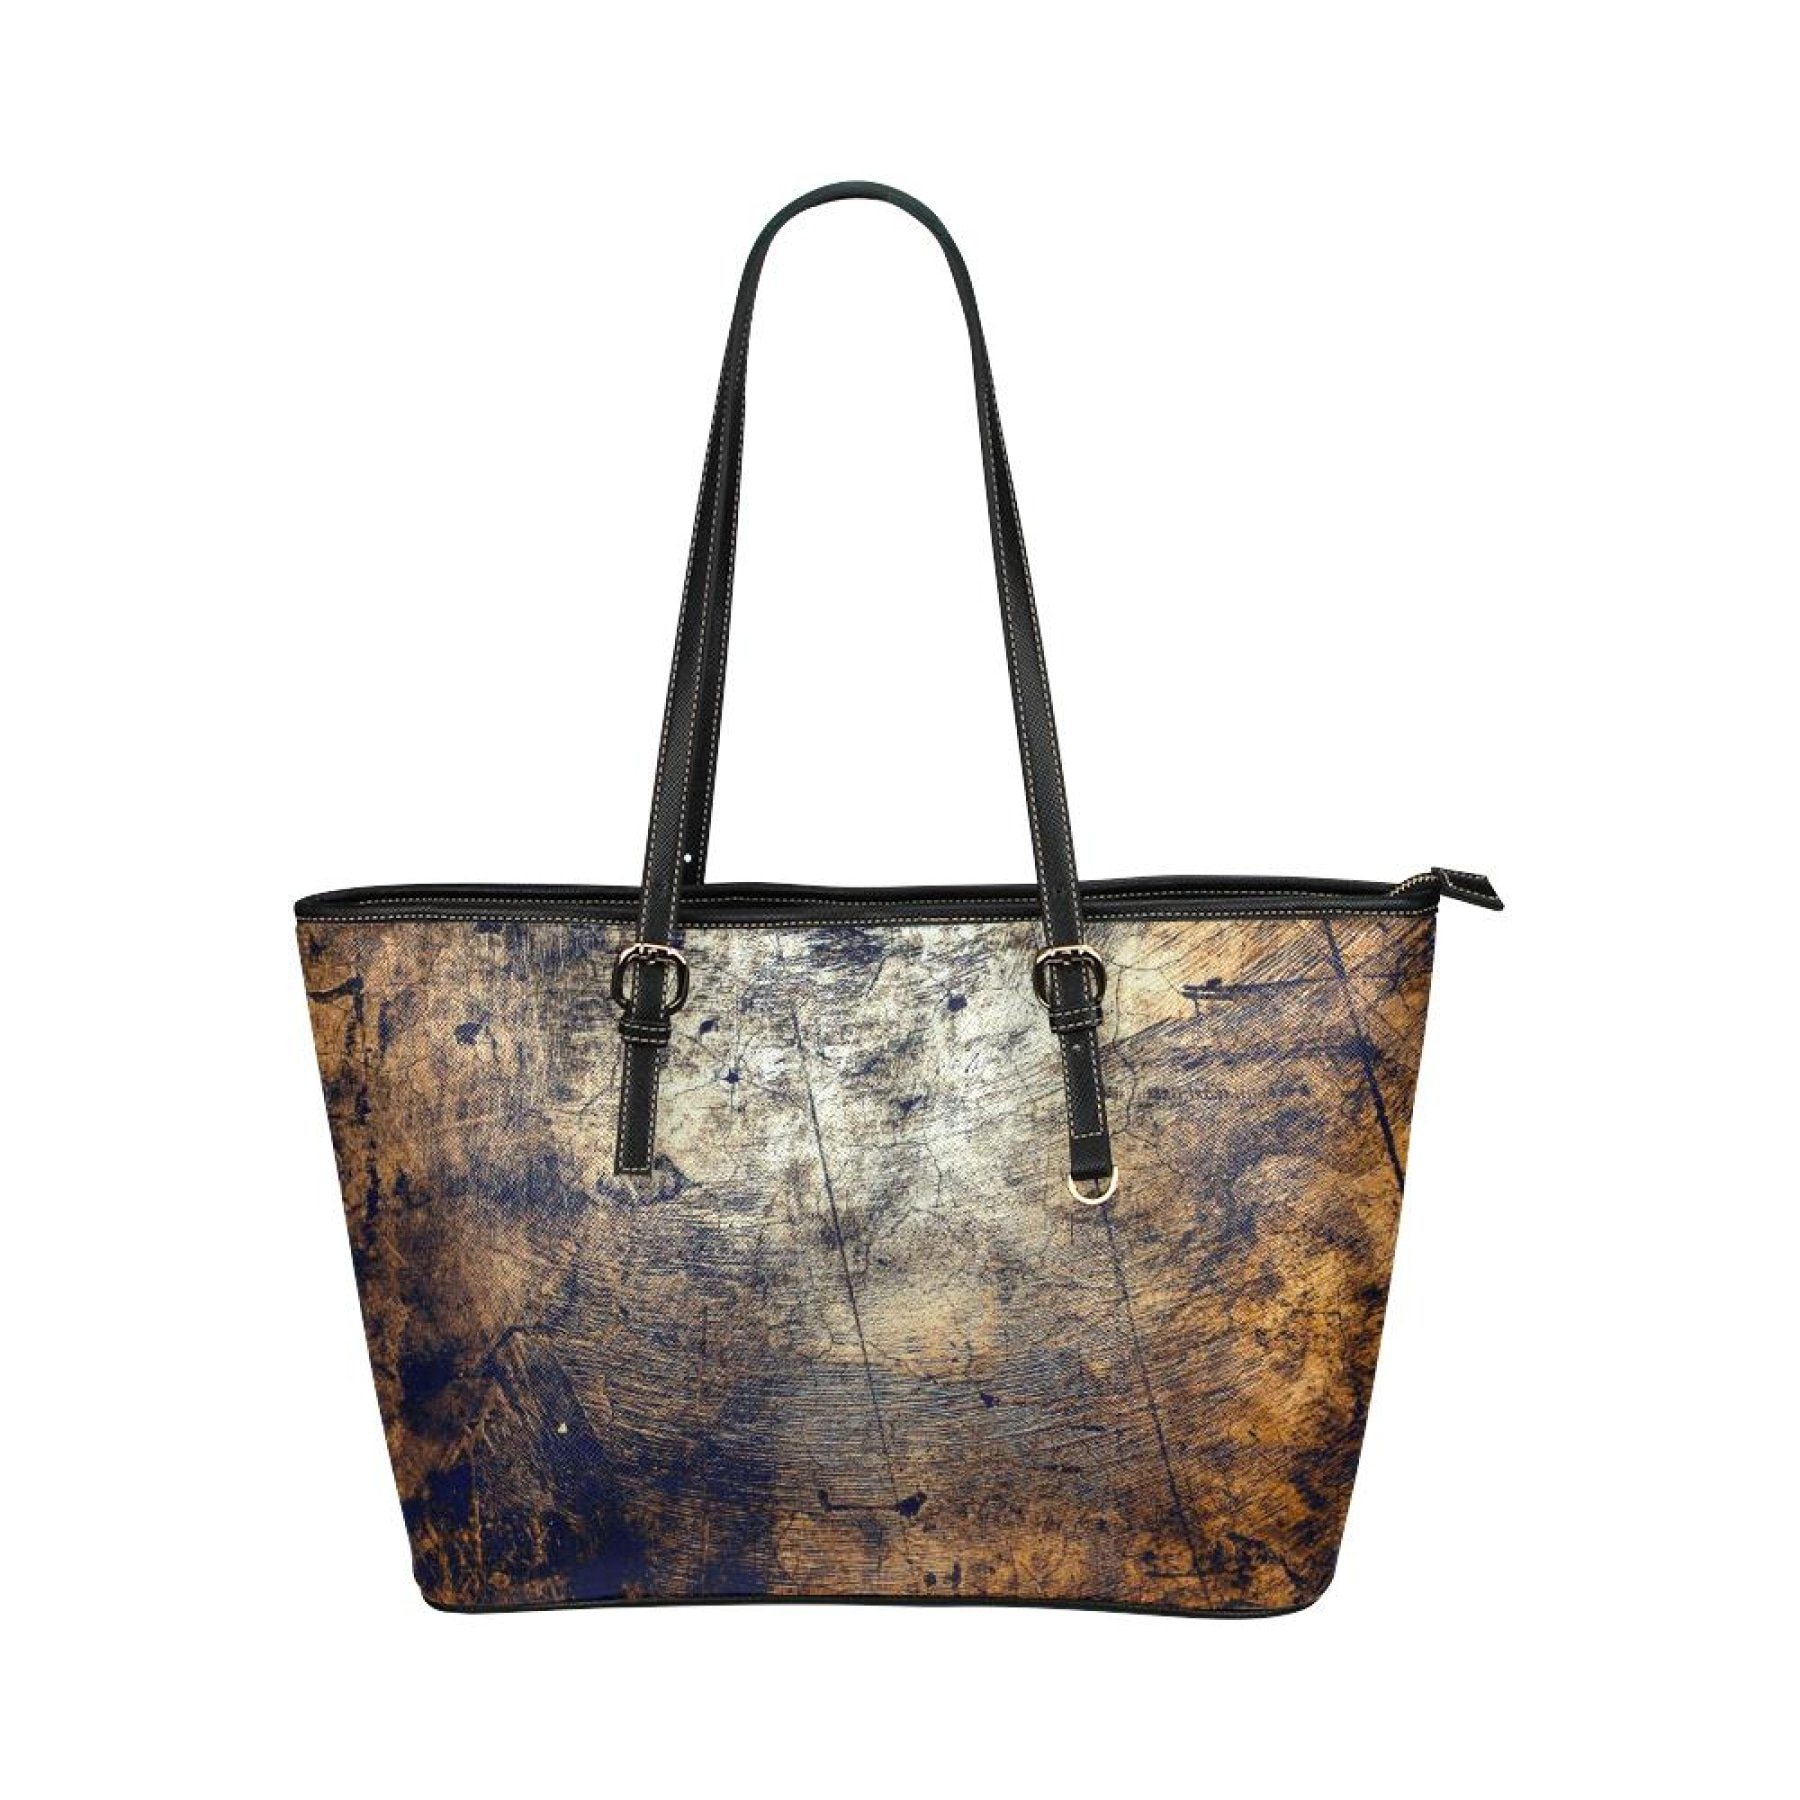 Brown Tote Shoulder Bag With Abstract Grunge Design 16